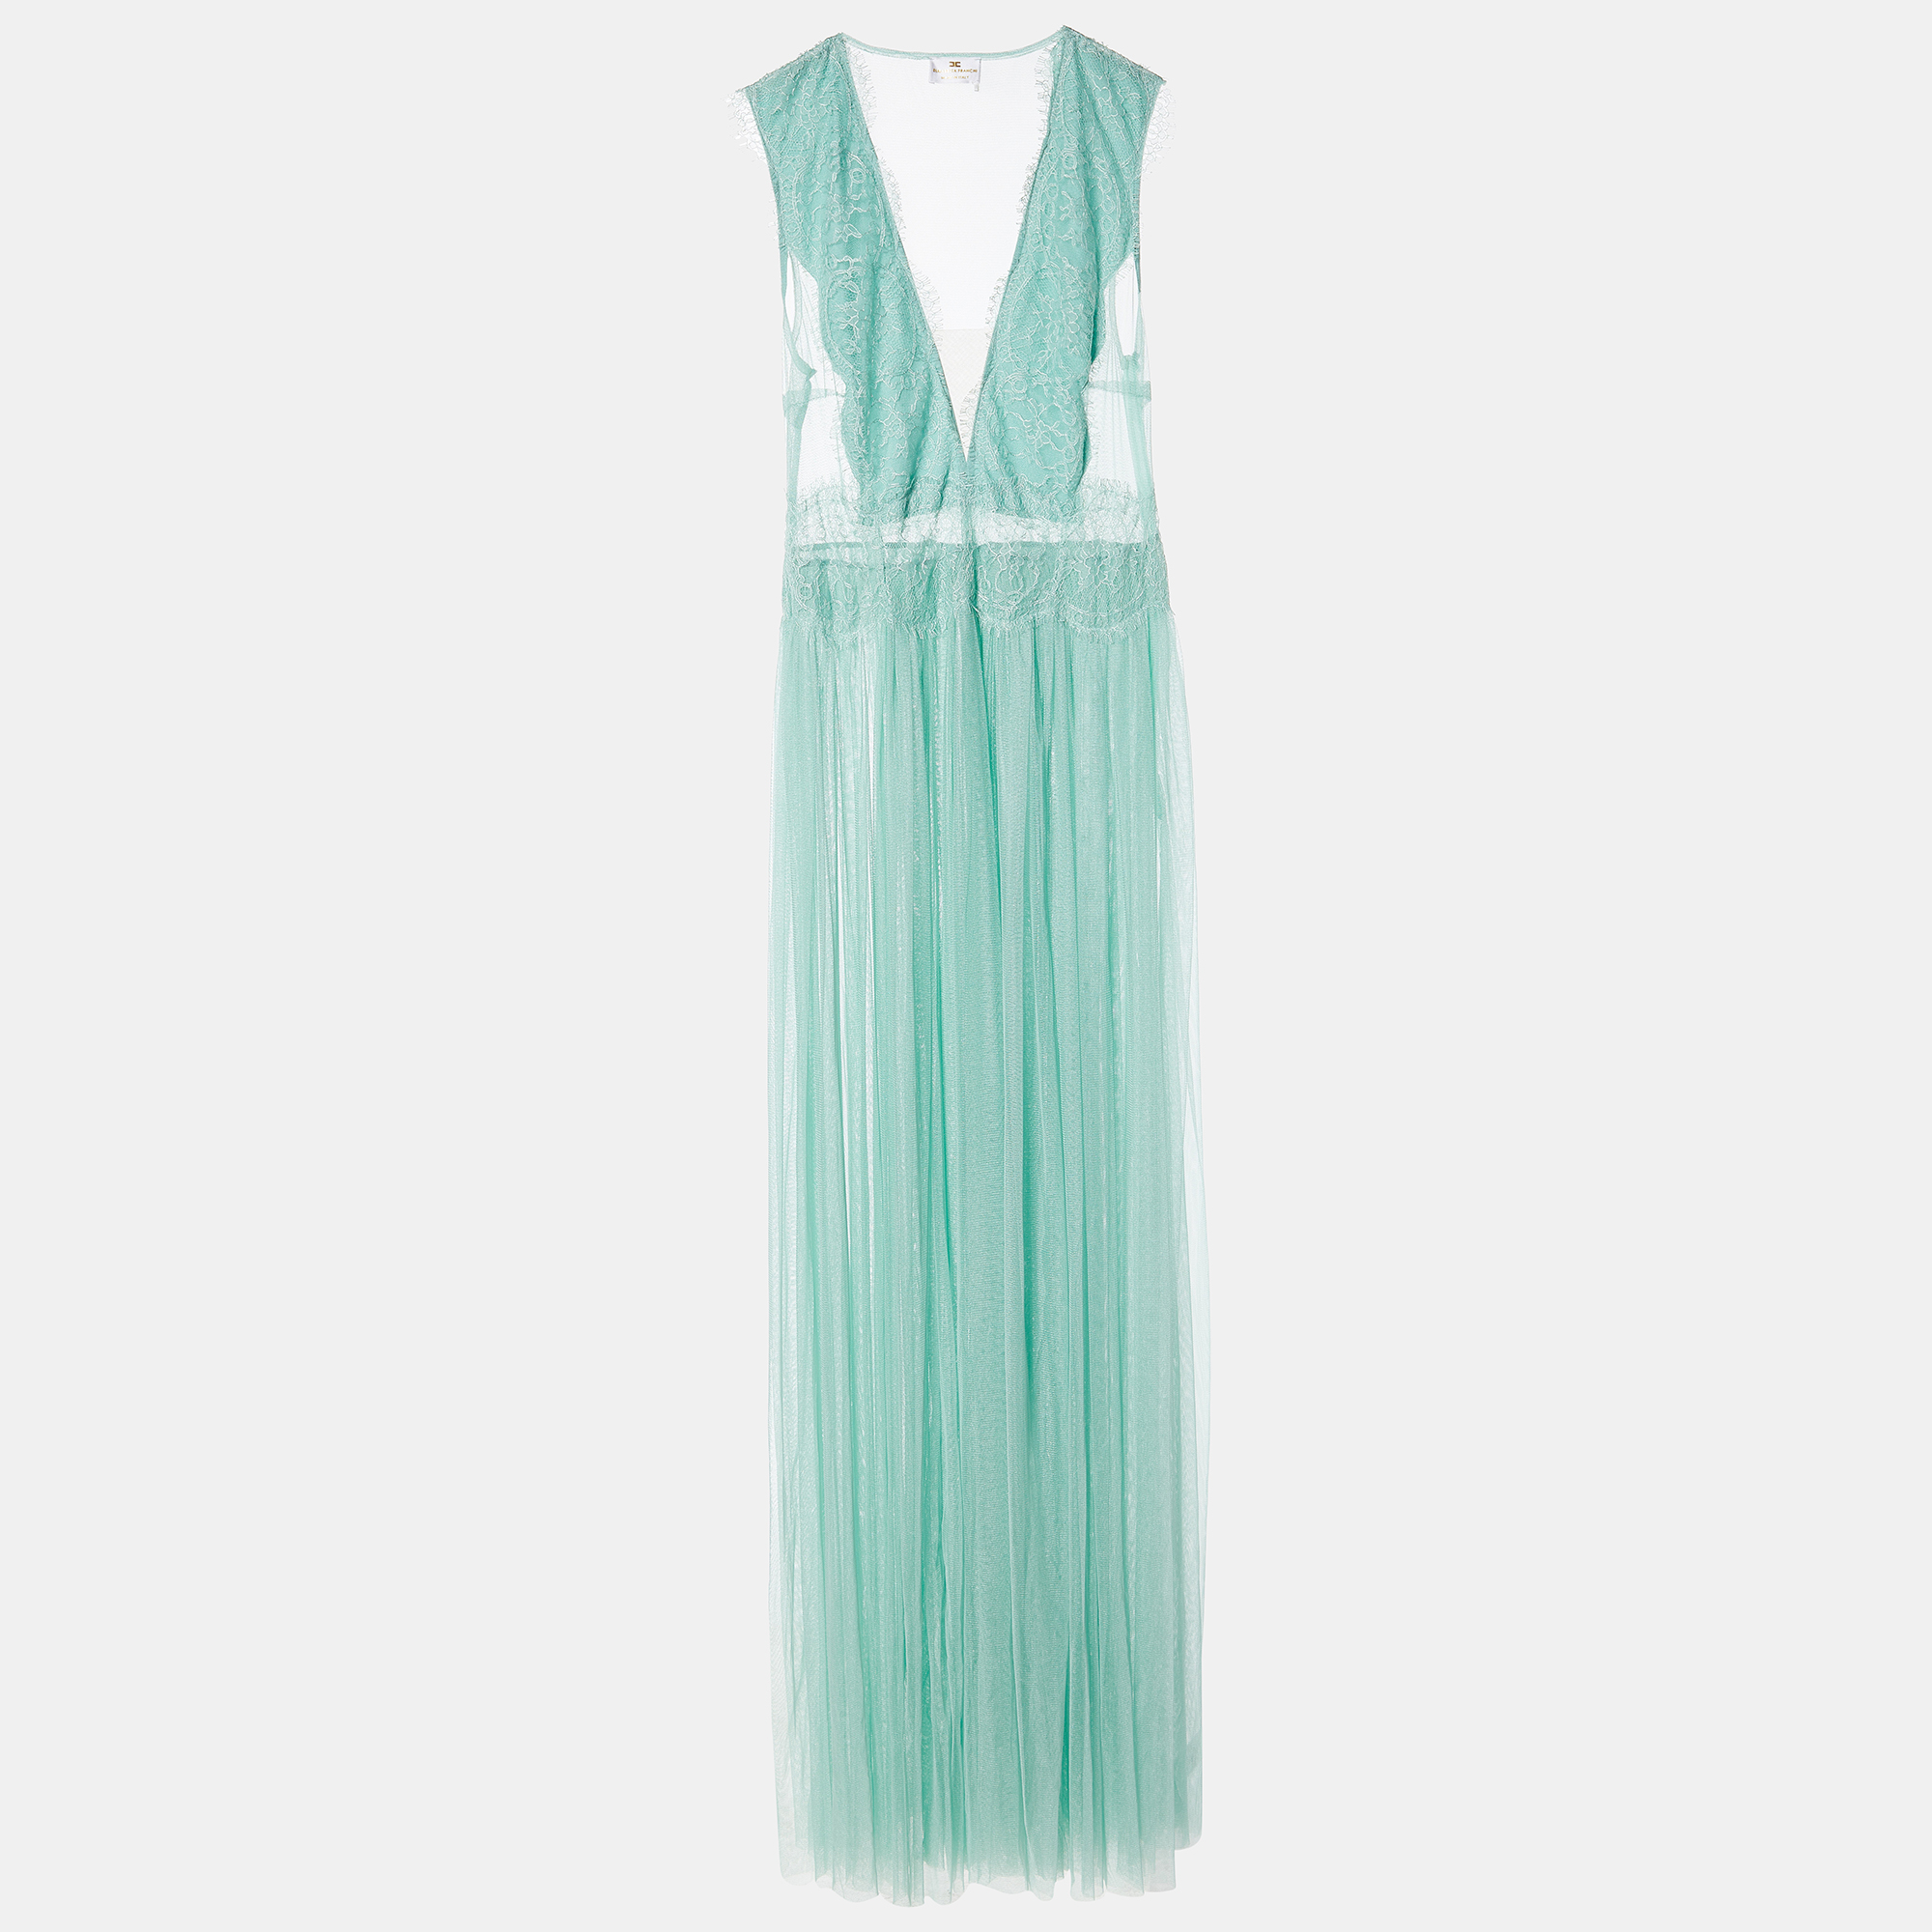 Pre-owned Elisabetta Franchi Mint Green Lace & Tulle Sleeveless Gown L